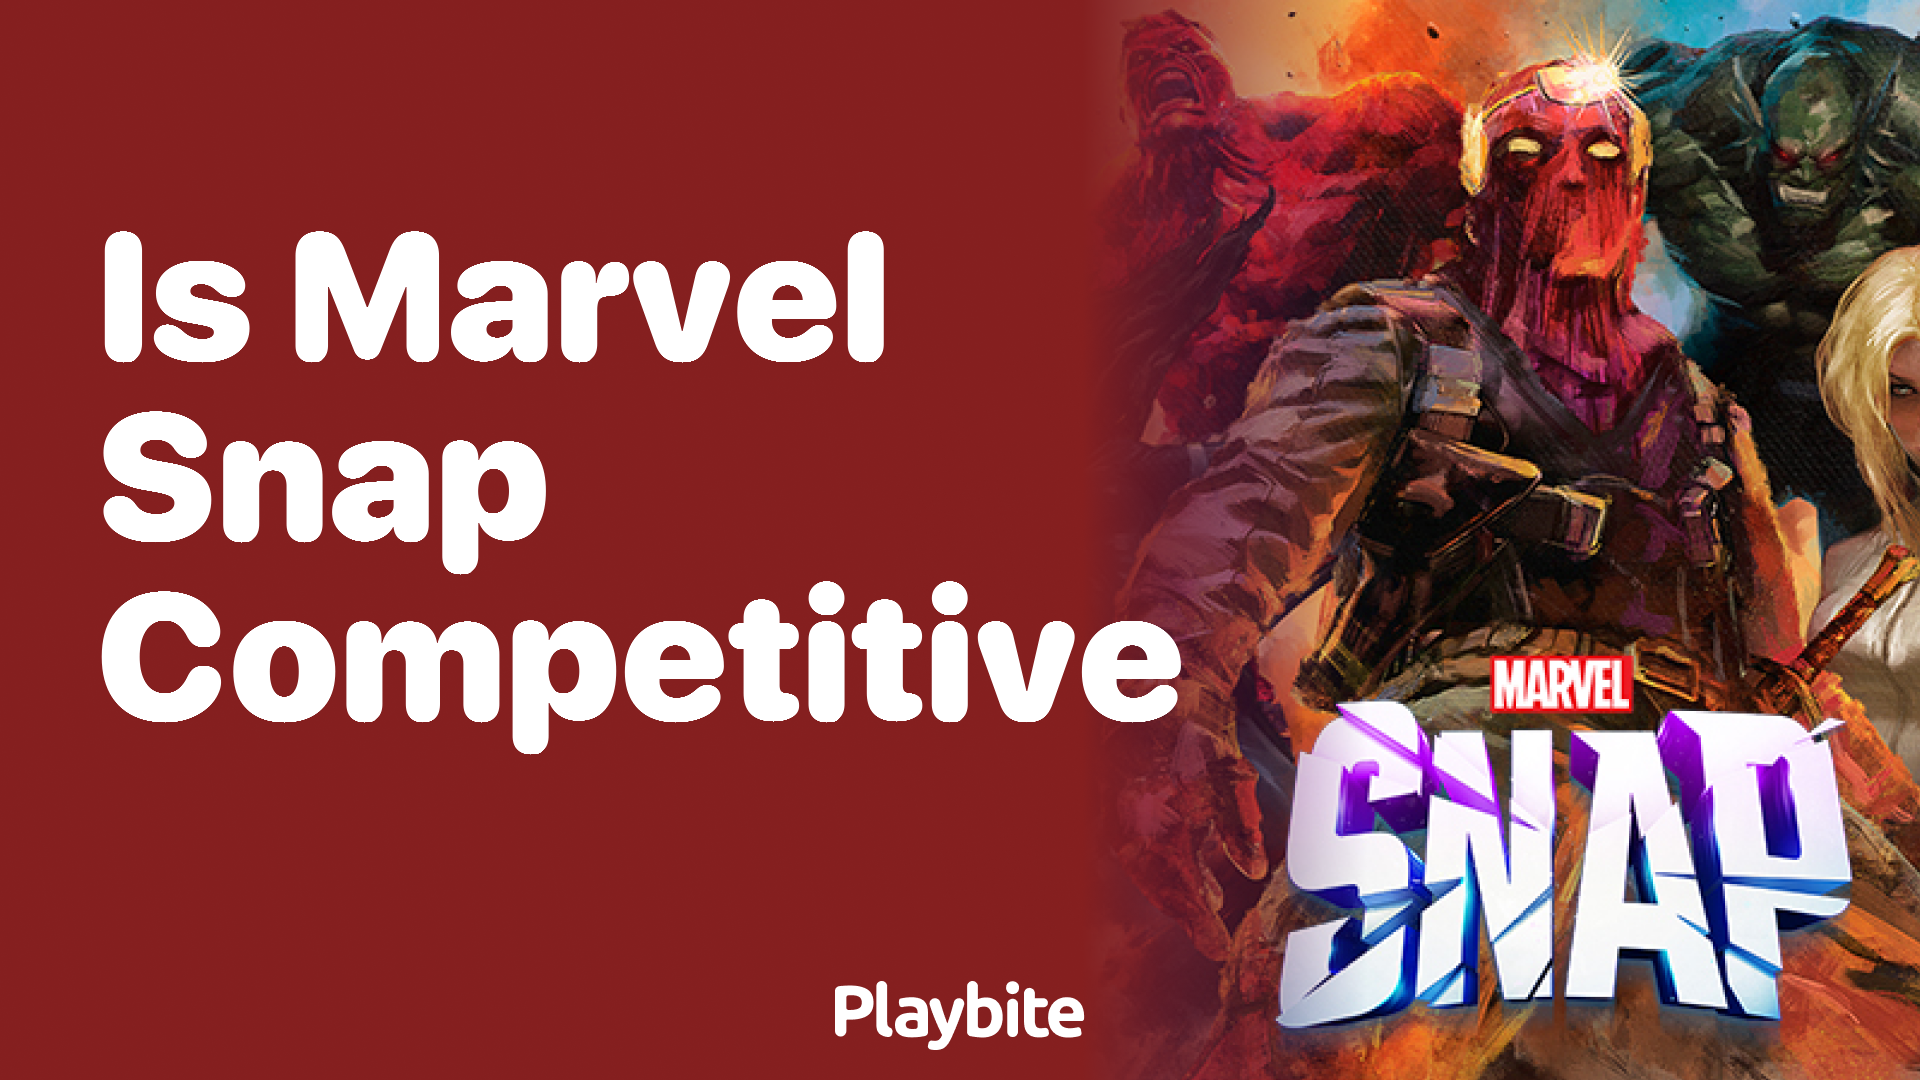 Can Marvel Snap be competitive?